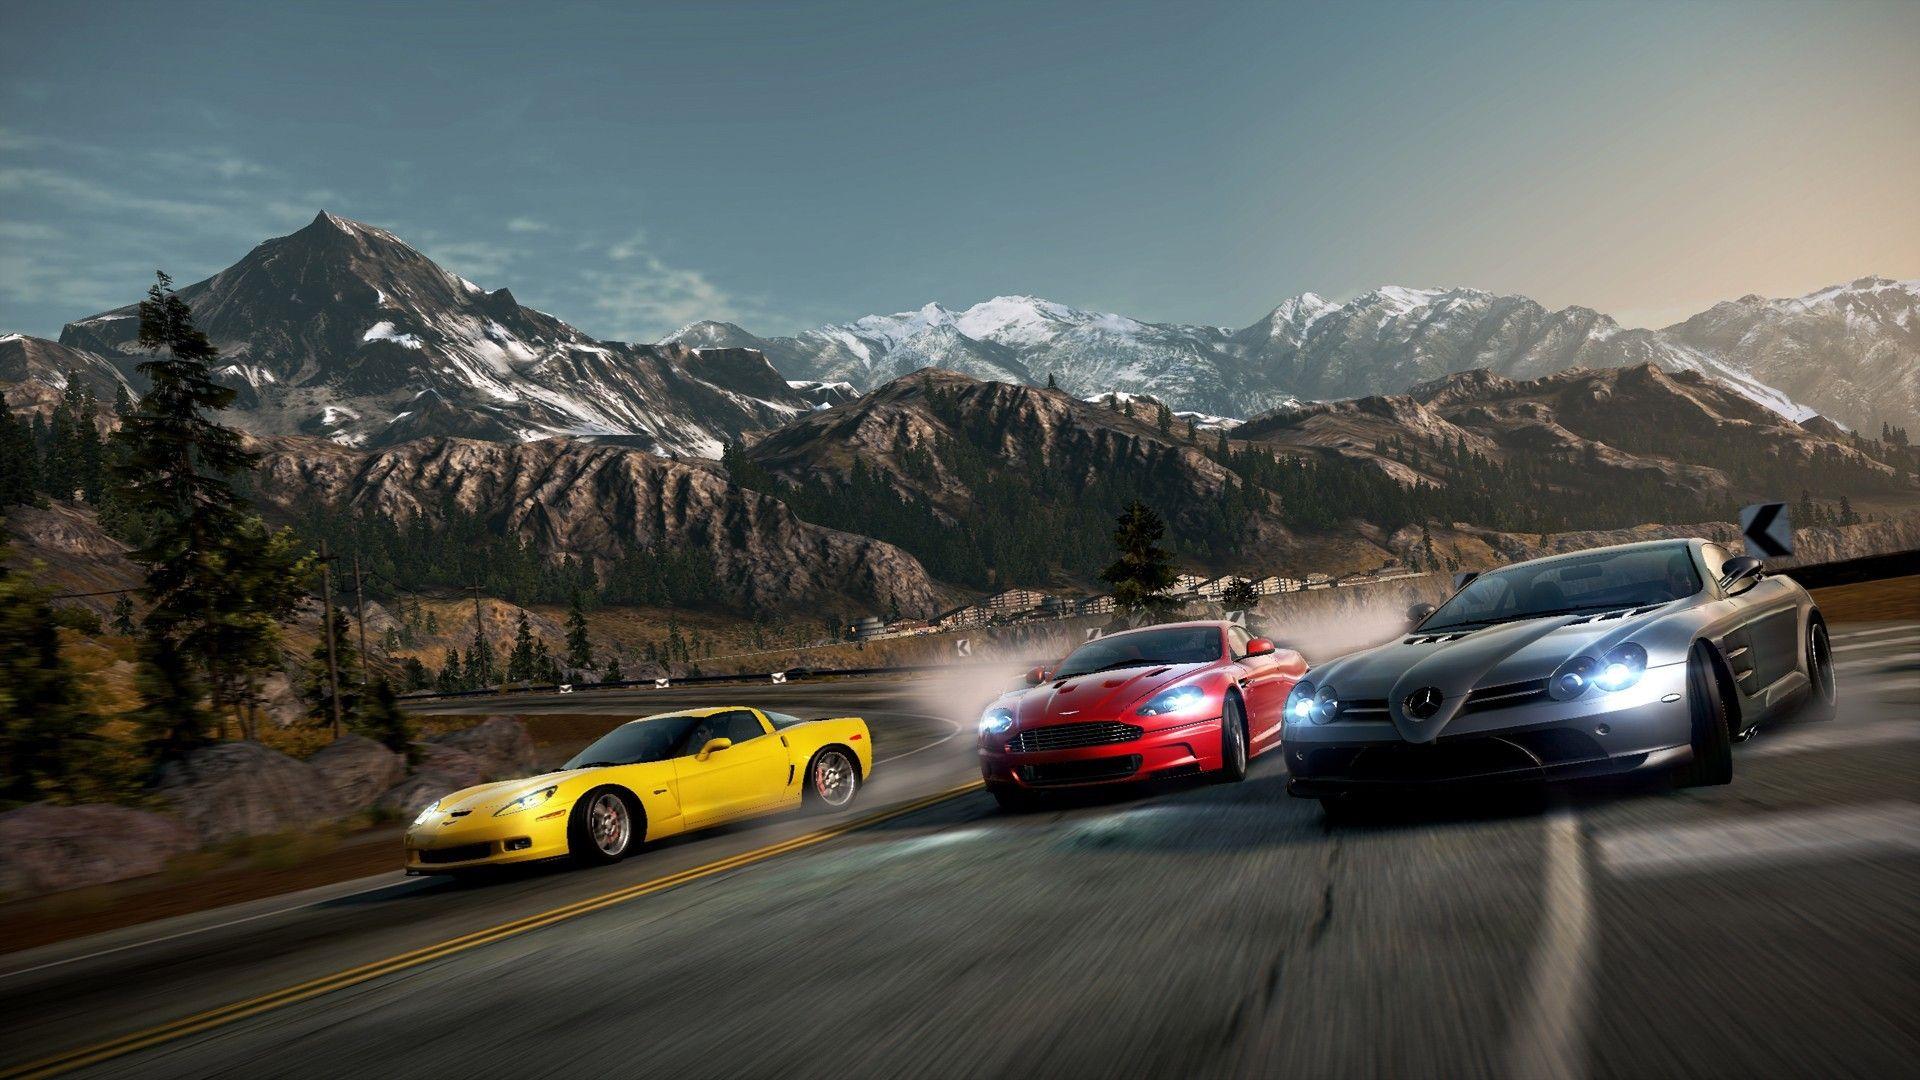 Movie Need For Speed HD Wallpaper